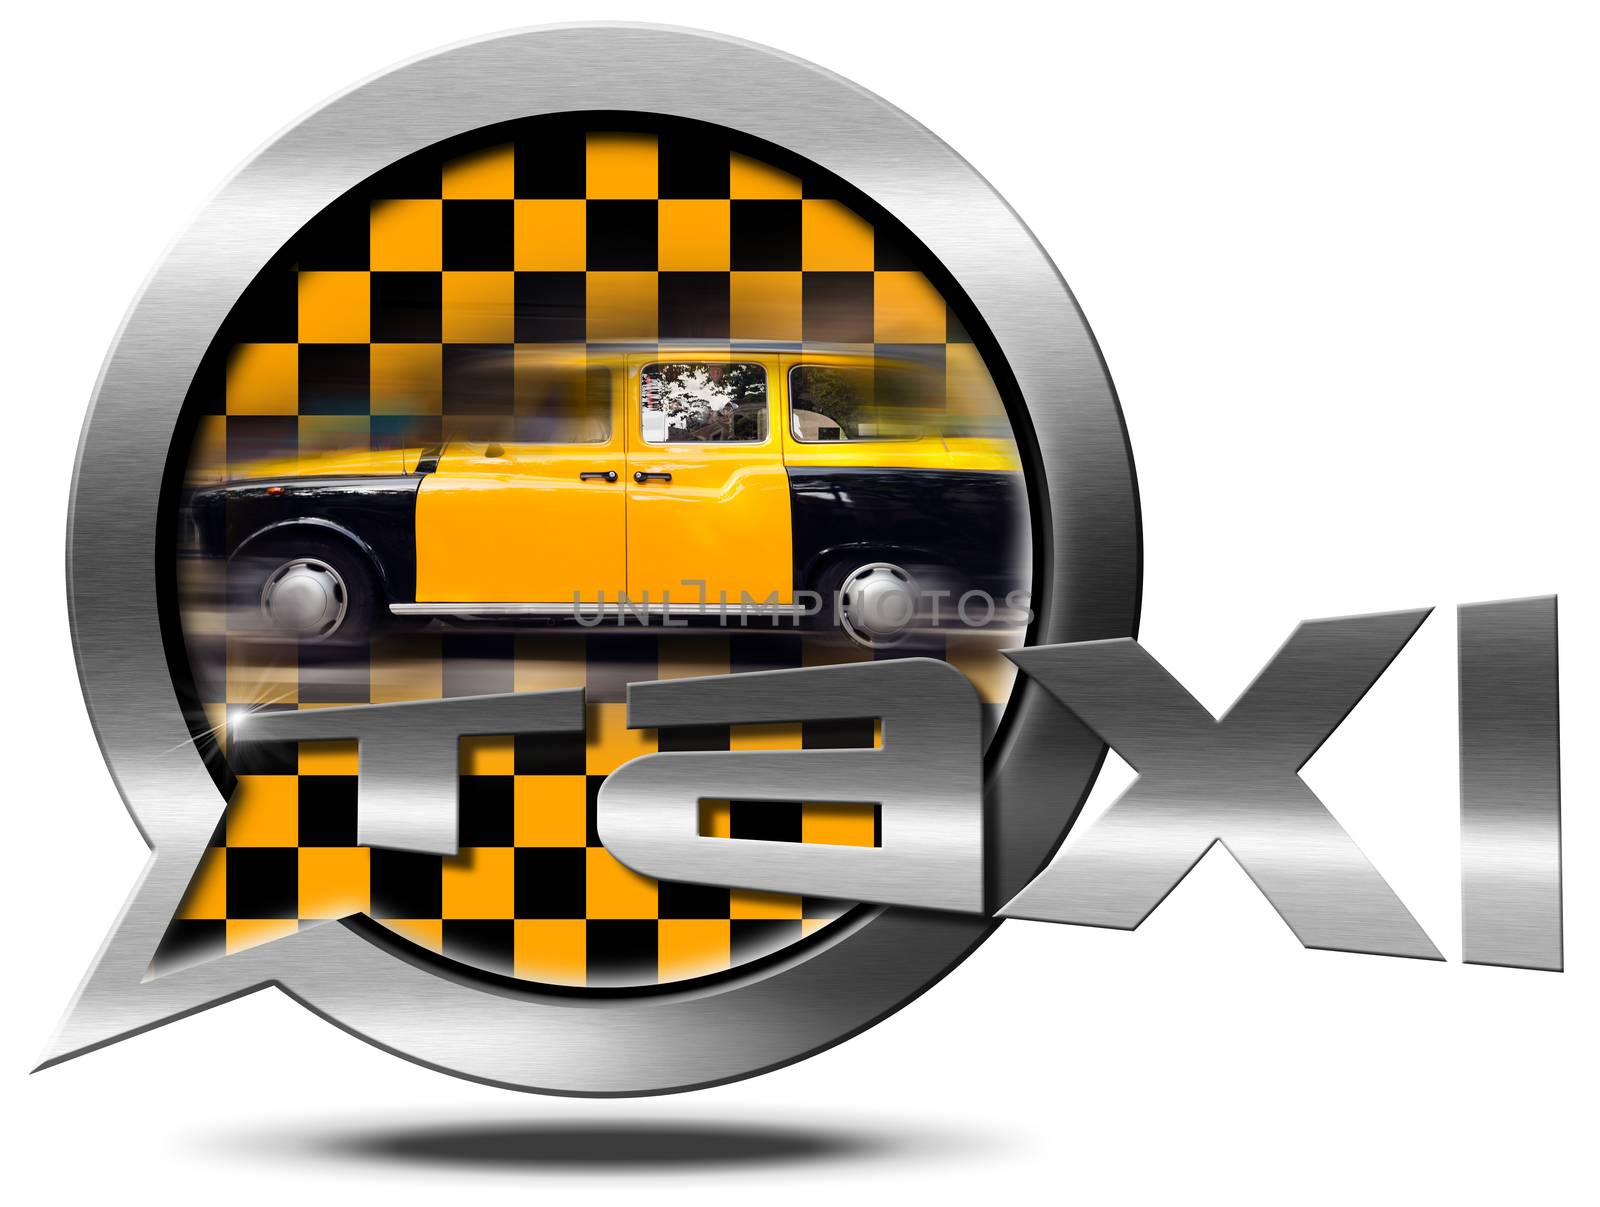 Icon or symbol in the shape of speech bubble with yellow and black Taxi in motion. Isolated on white background